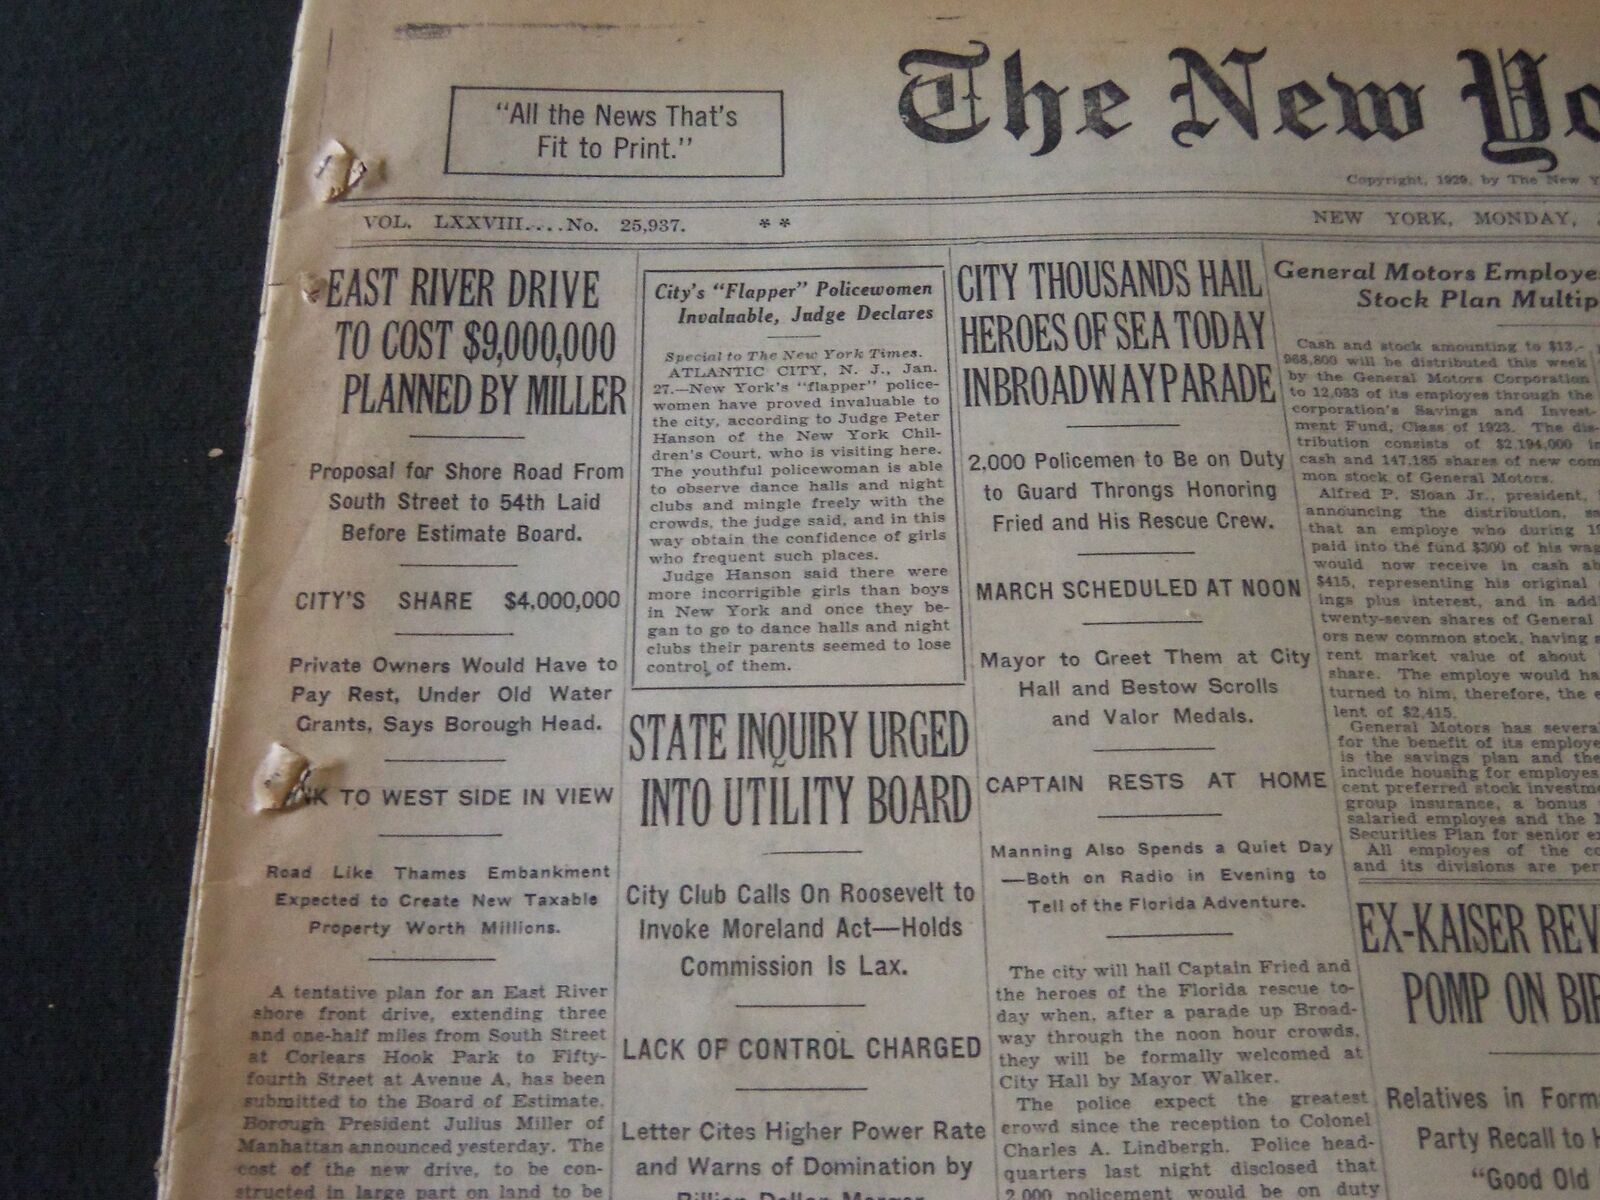 1929 JANUARY 28 NEW YORK TIMES - EAST RIVER DRIVE TO COST $9,000,000 - NT 6639